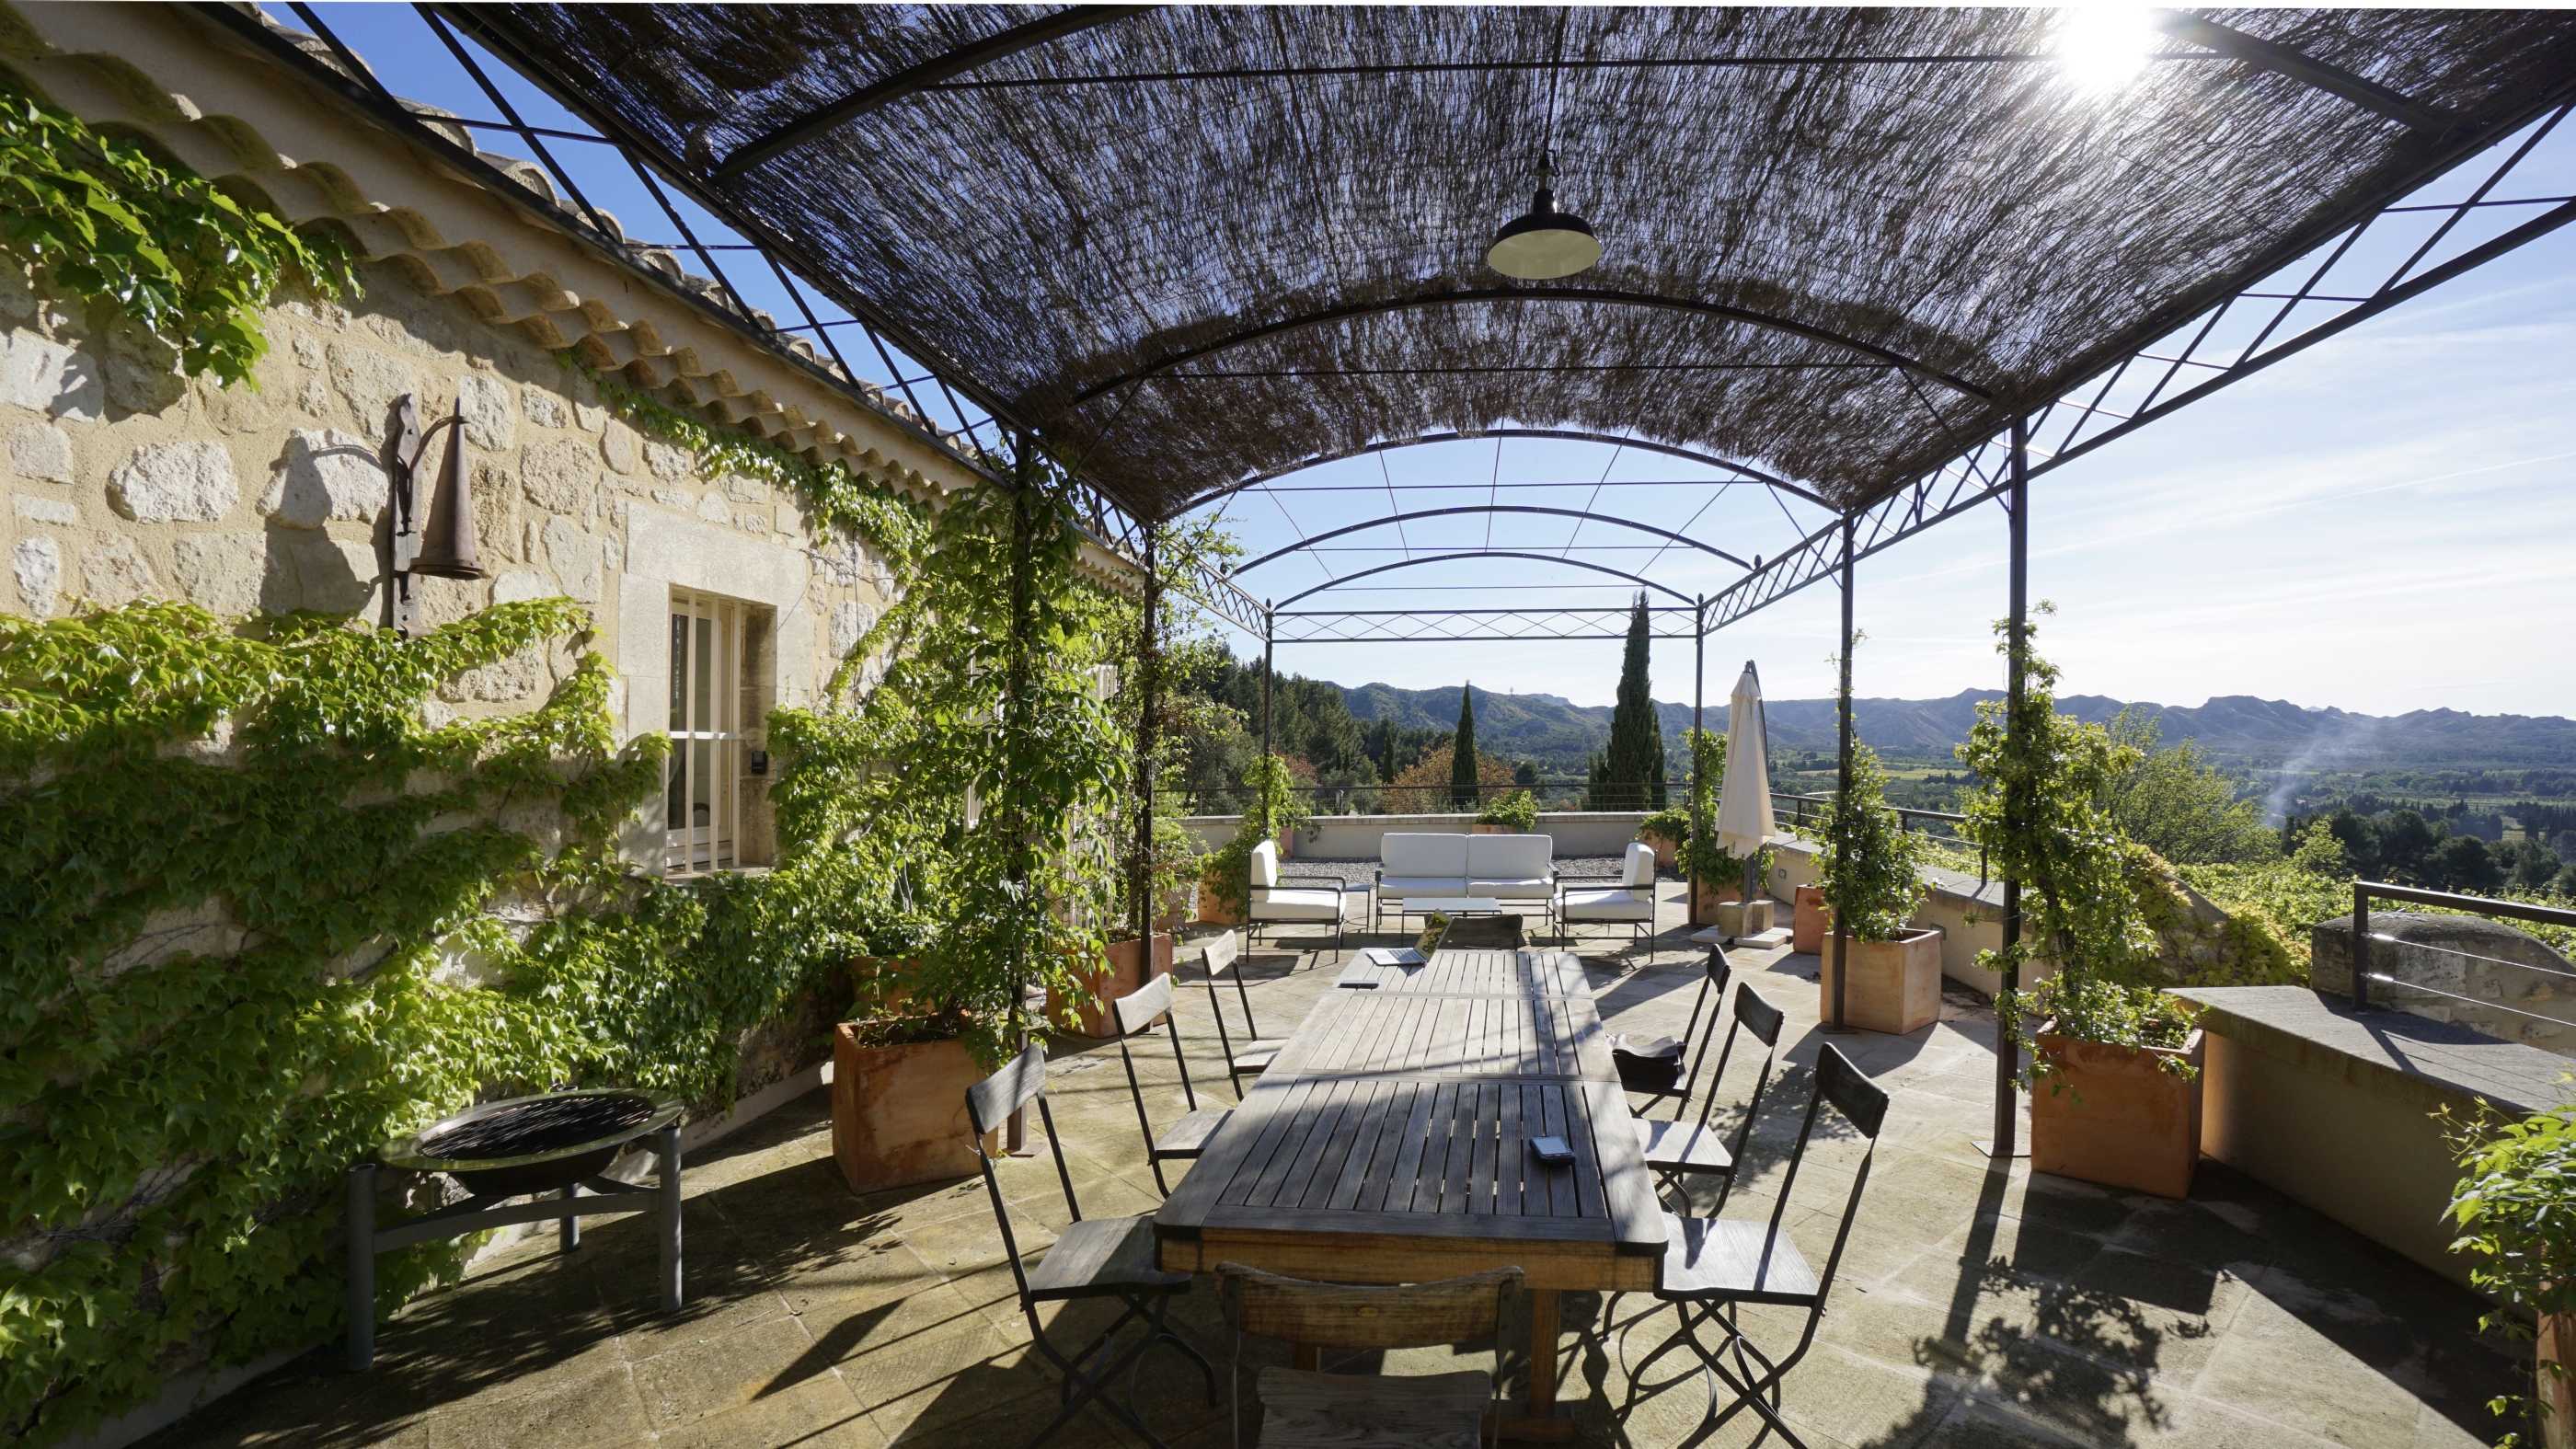 terrace at Les Rochers, Provence